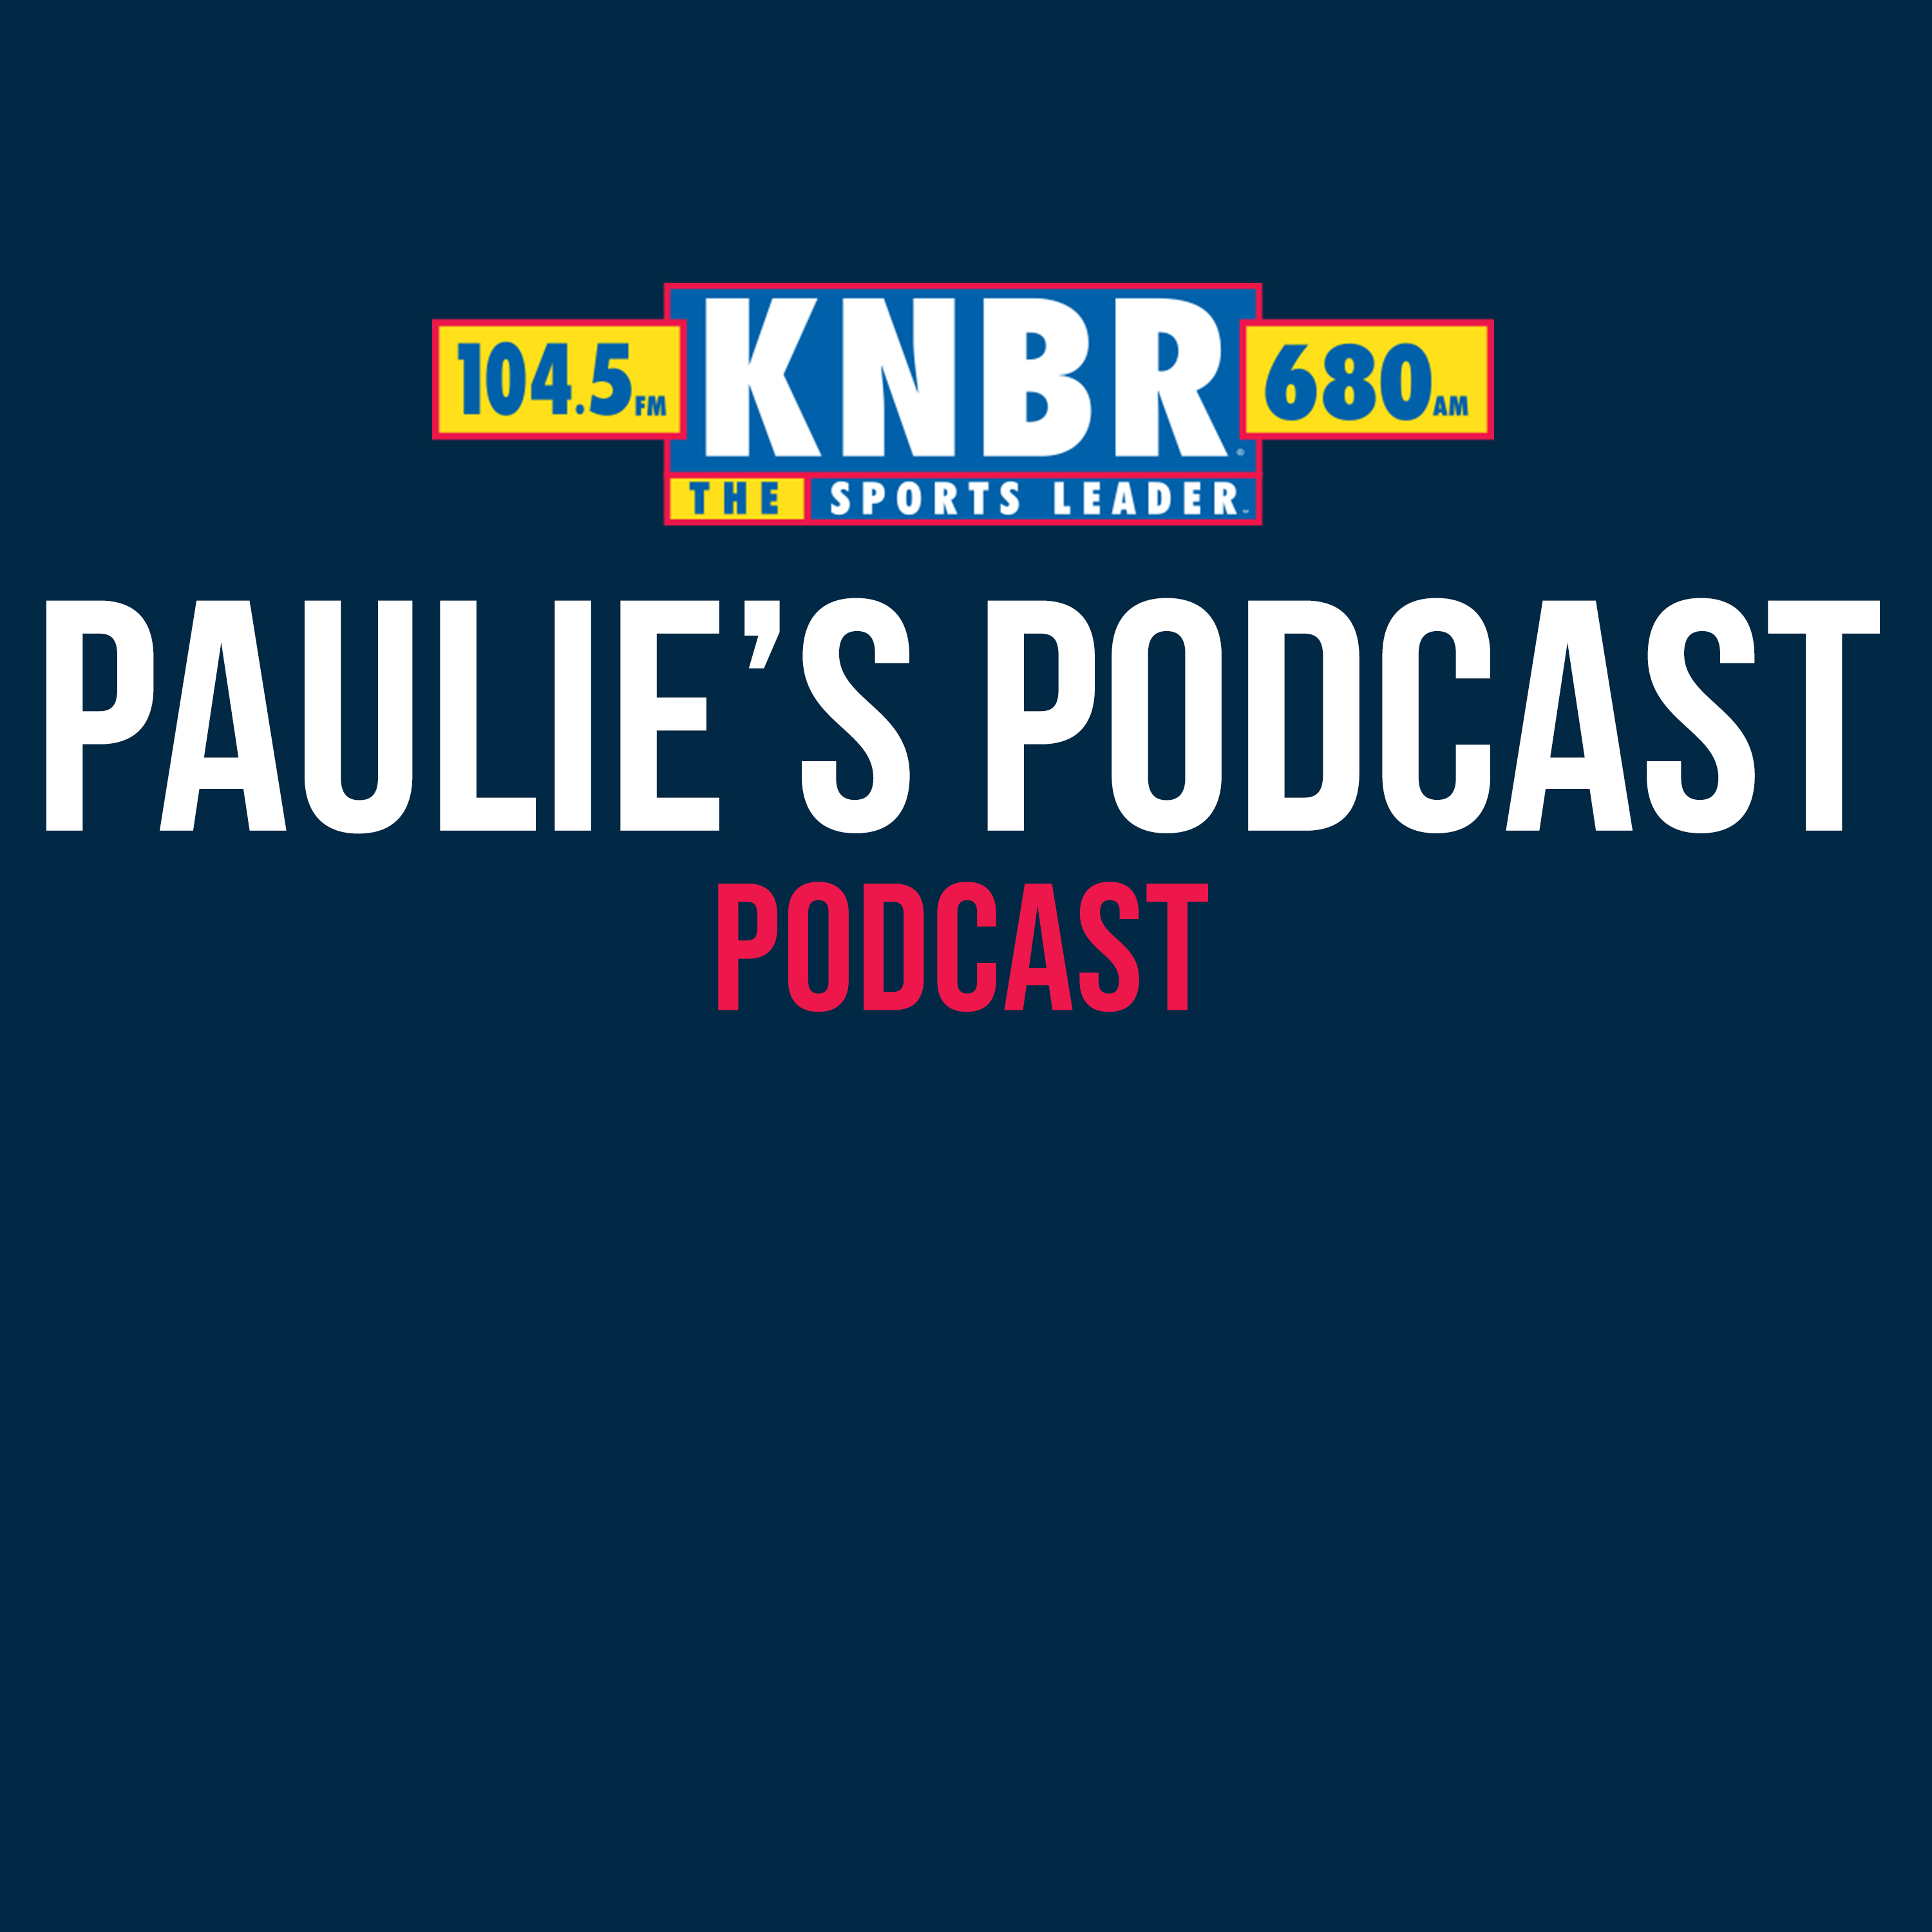 7/21: A Best-Of Paulie's Podcast featuring Bruce Bochy and Keith Hernandez